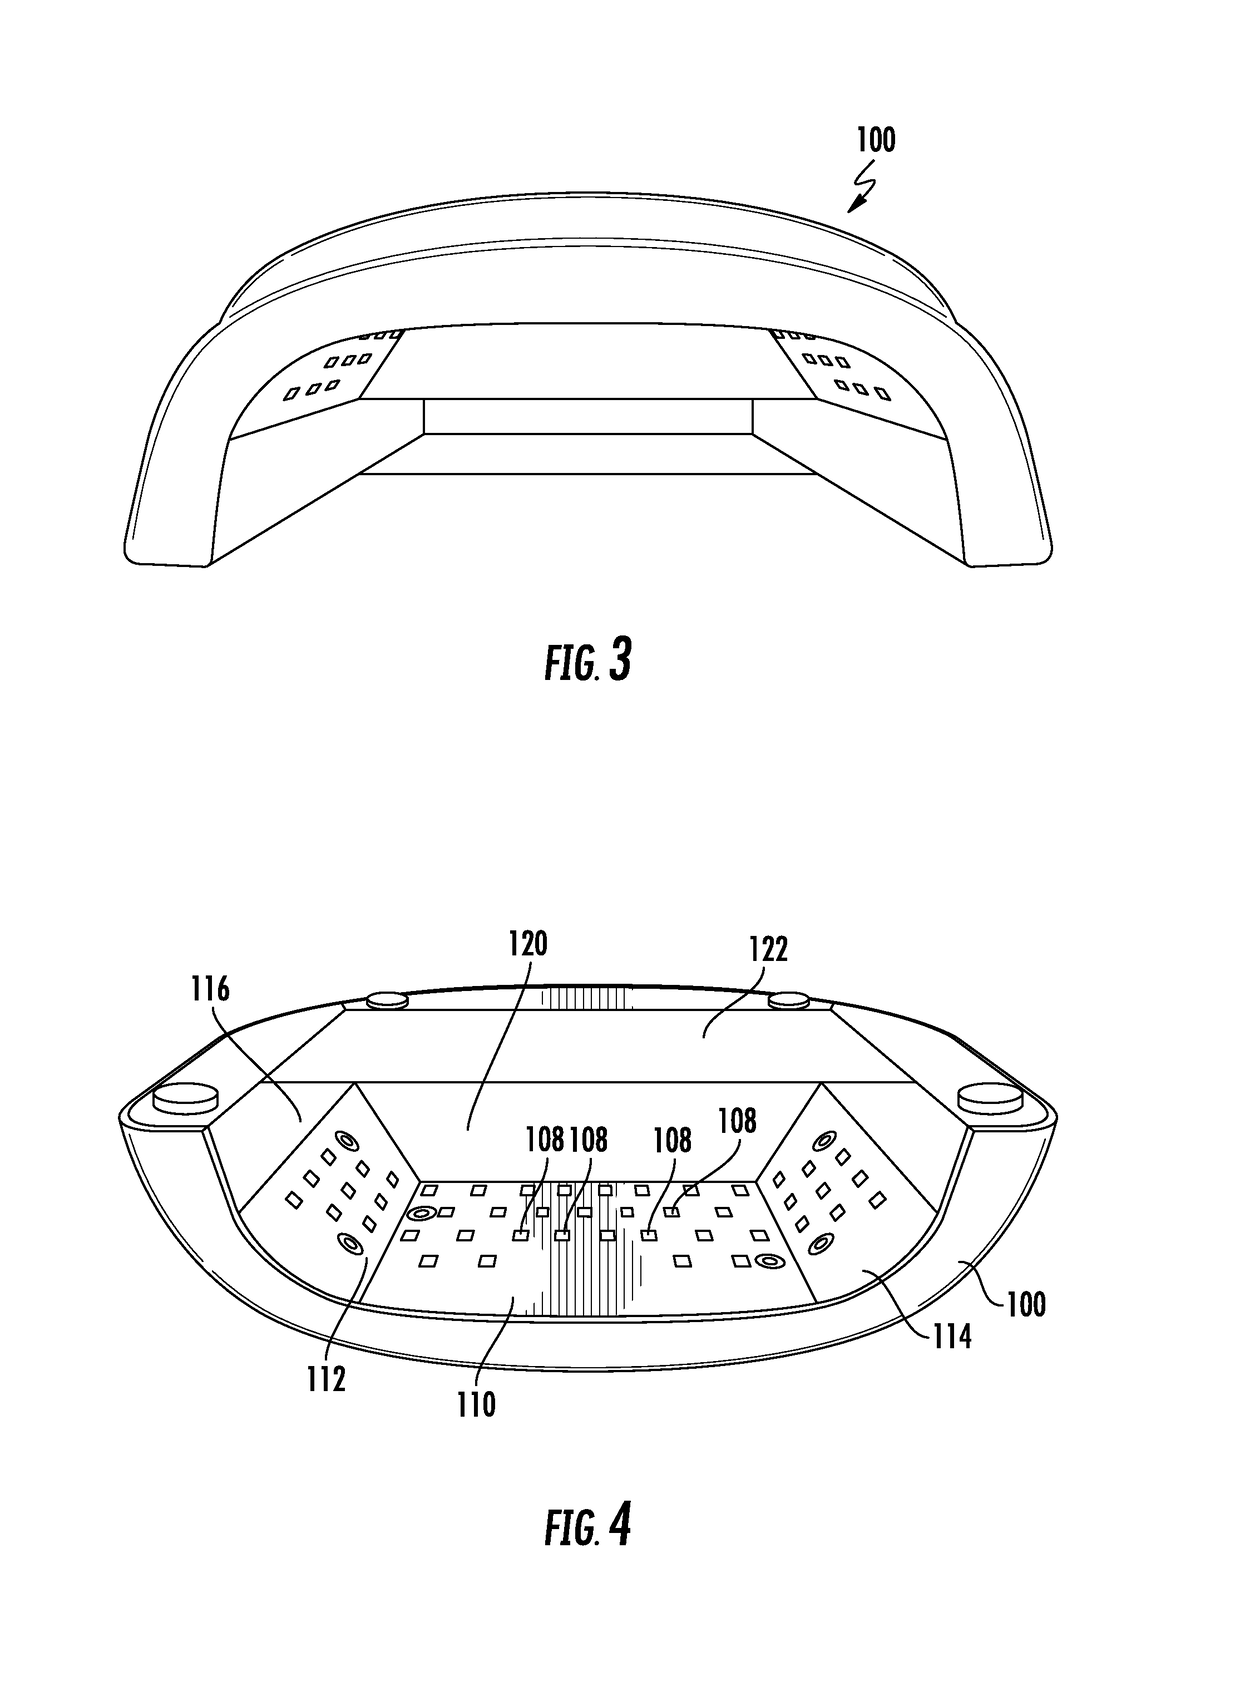 Nail lamp with light emitting diodes and rechargeable battery